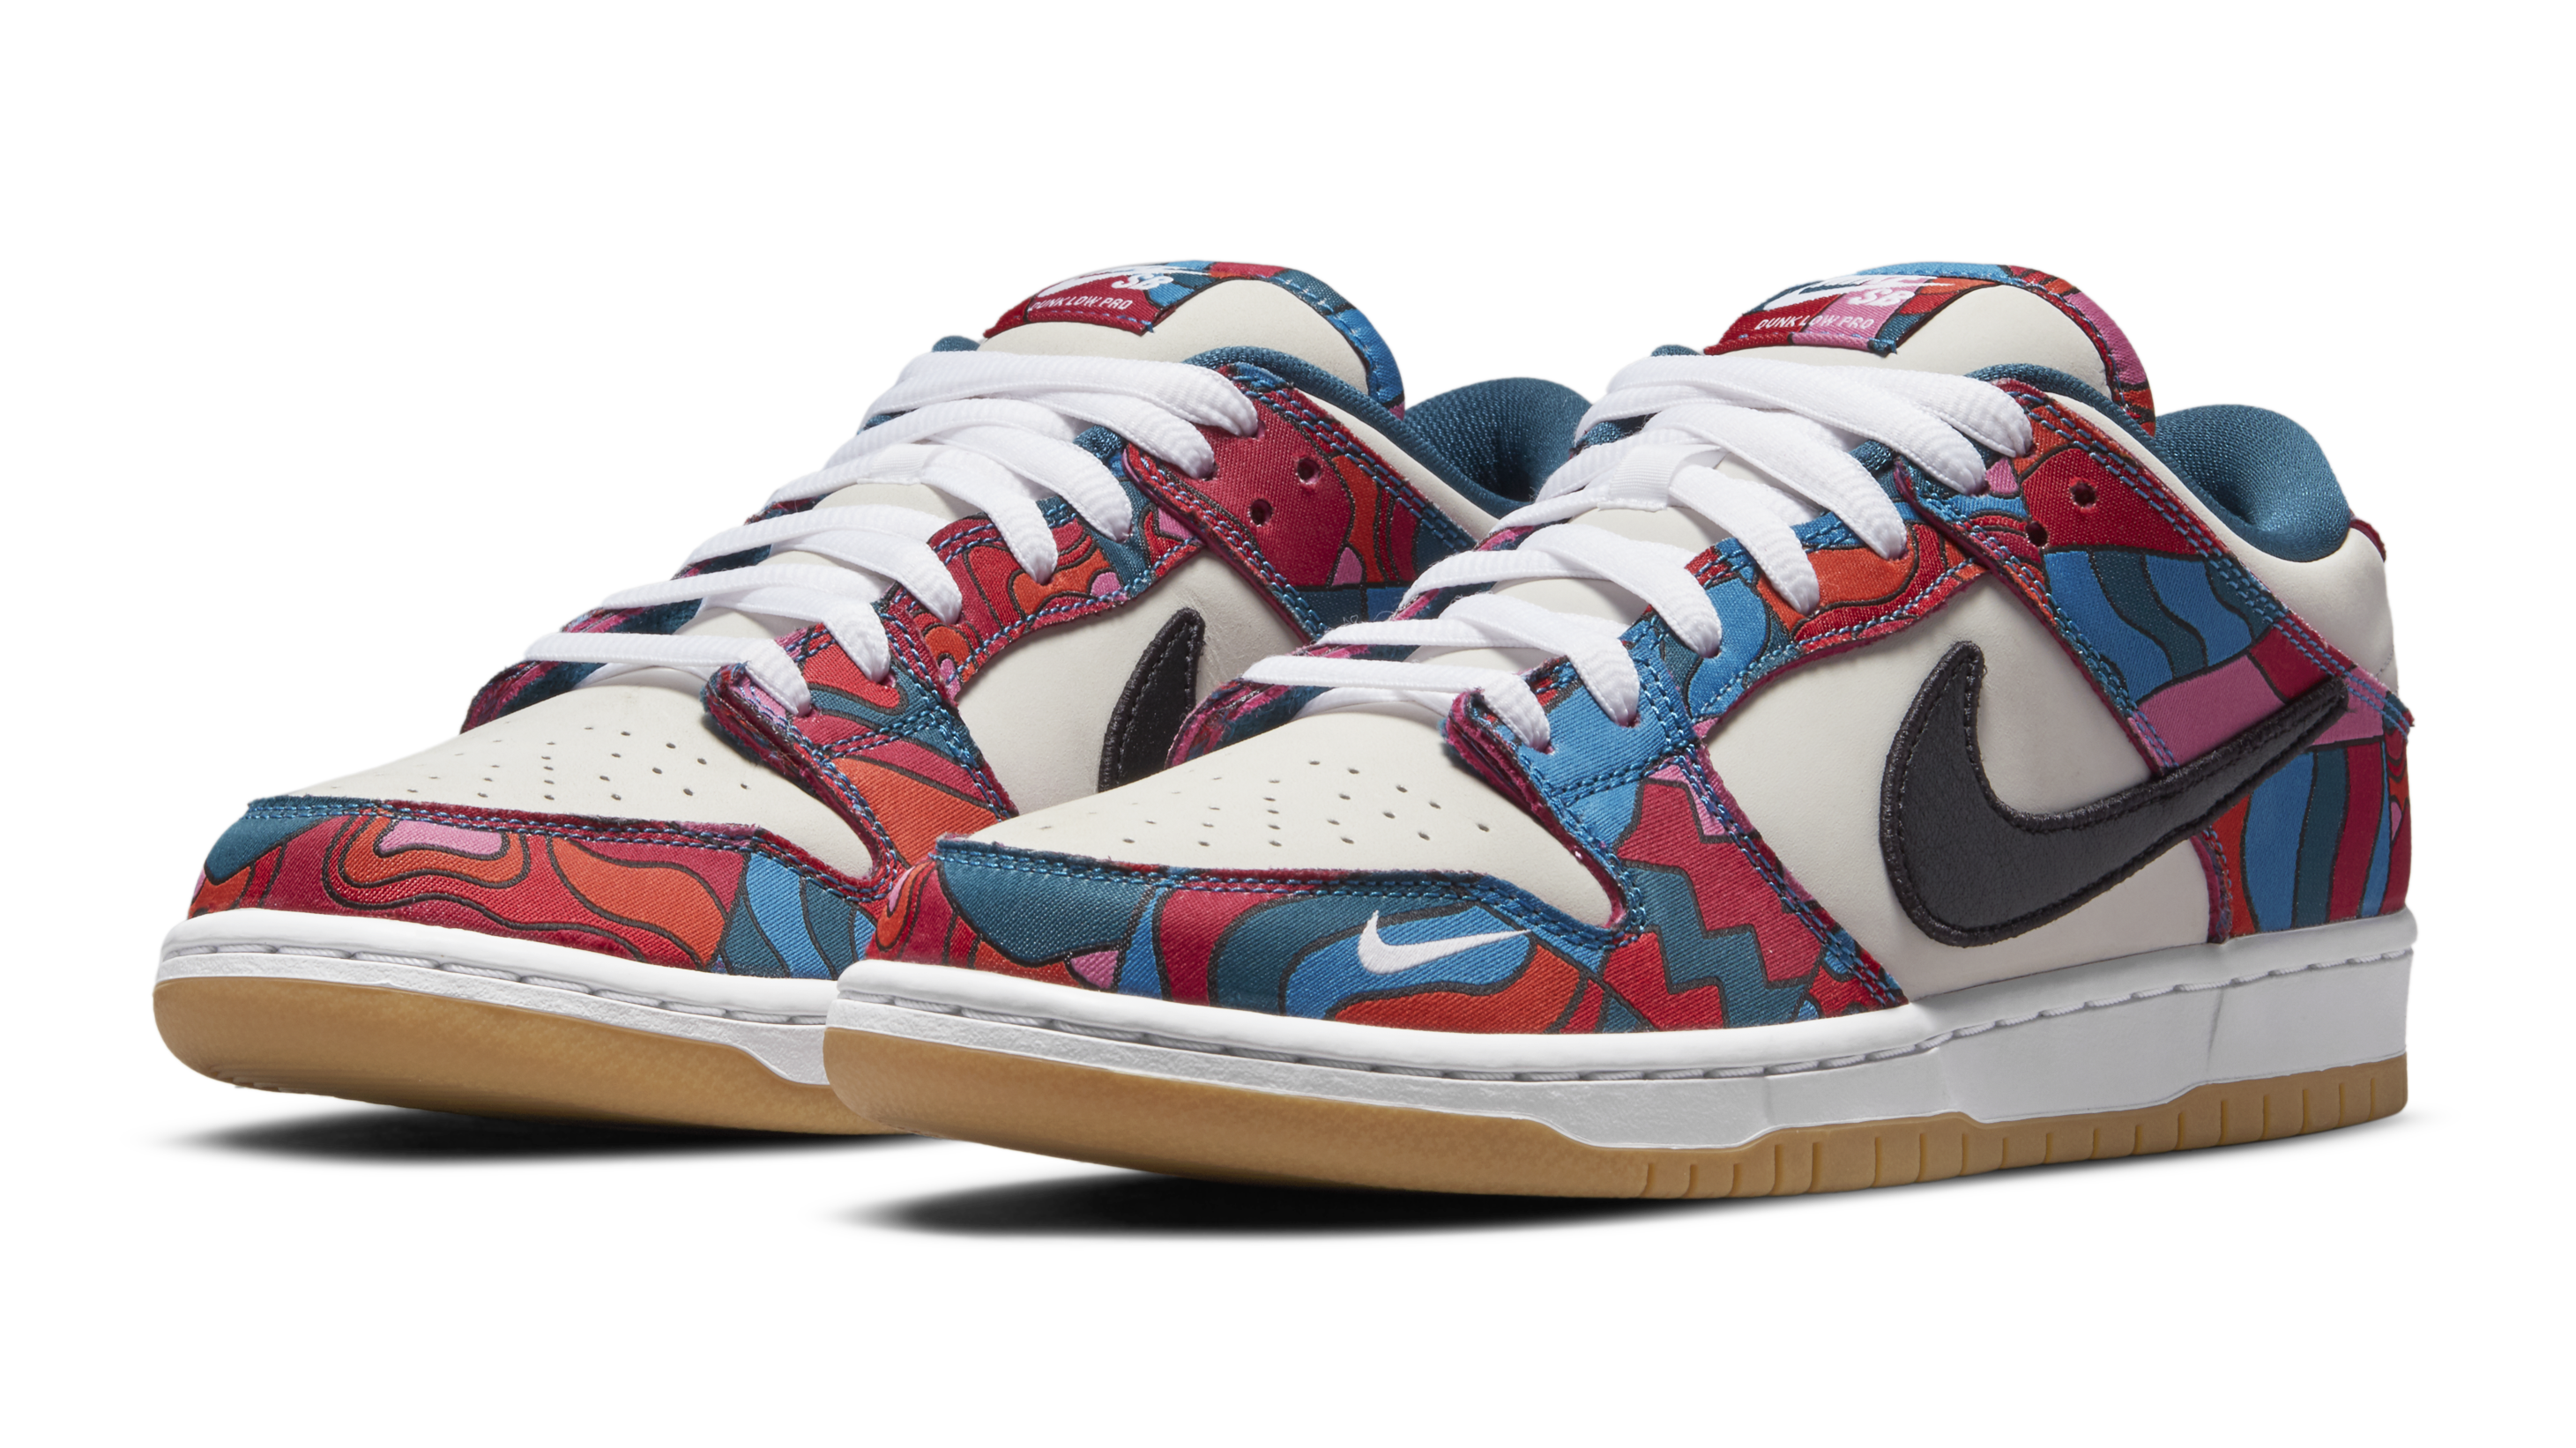 Nike SB Is Releasing Several Dunk Collabs for the Tokyo Olympics